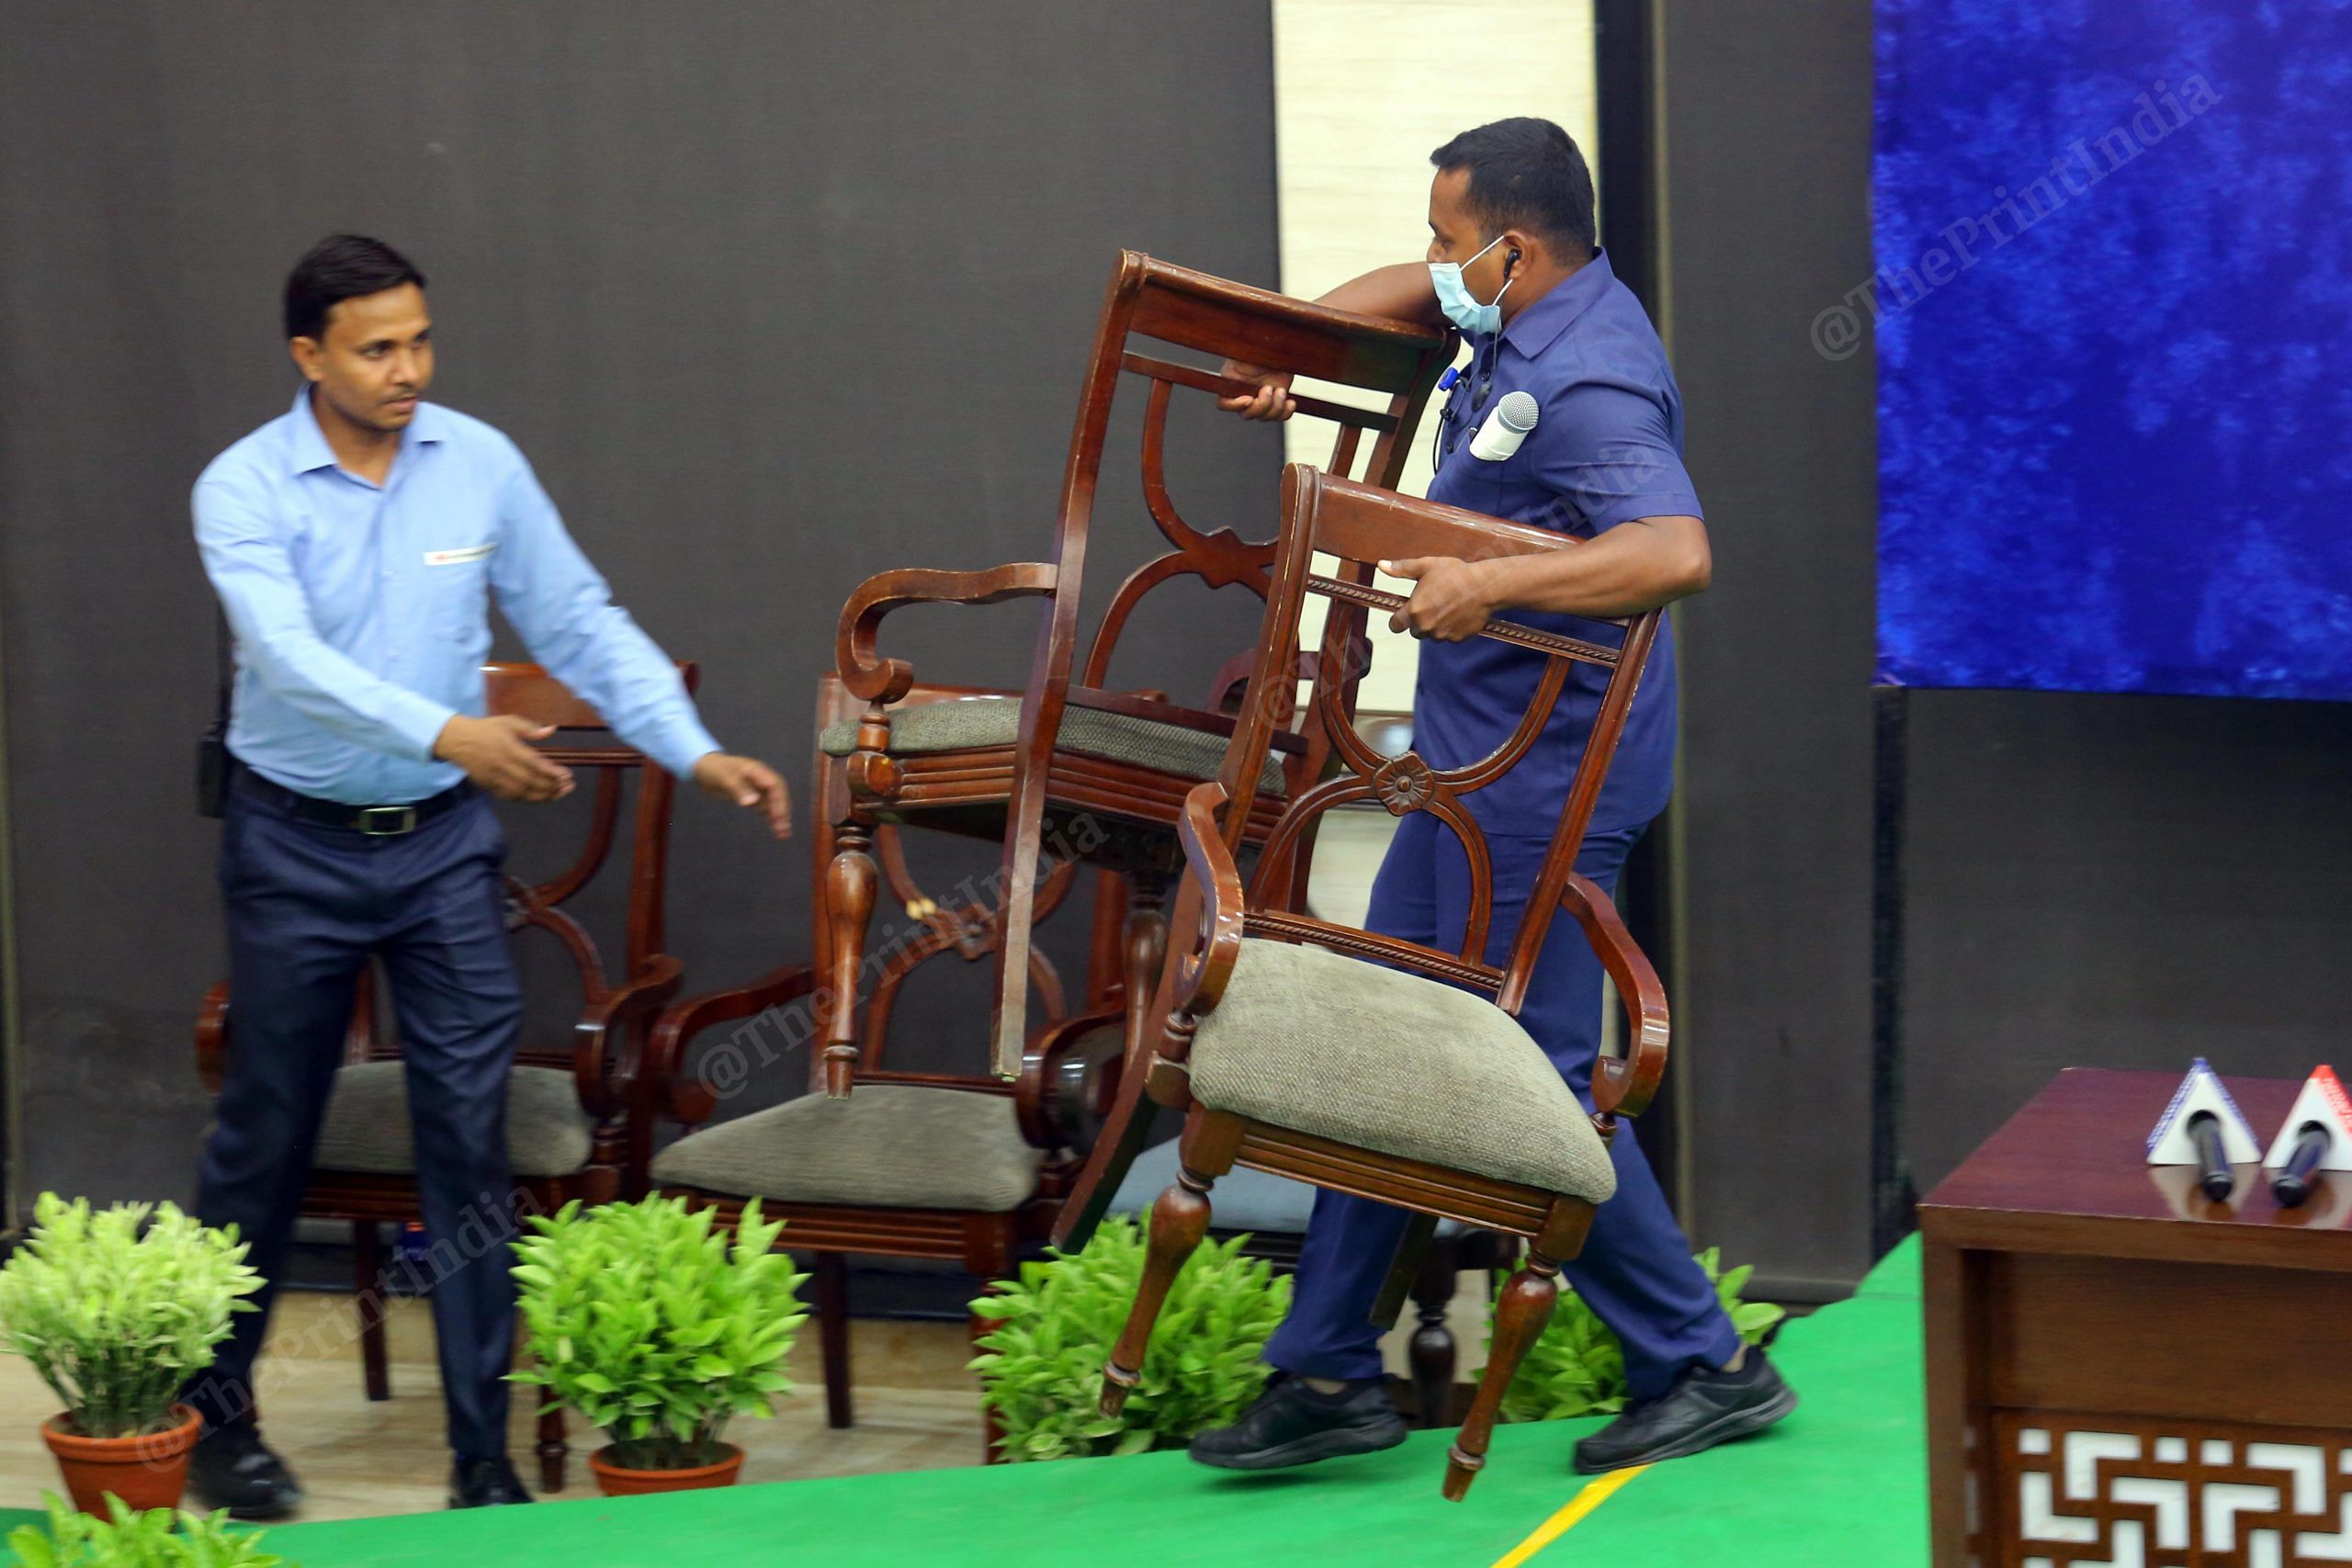 Till the last minute the number of chairs on the dais kept changing, probably because of a confusion over who all will address the media | Photo: Praveen Jain | ThePrint